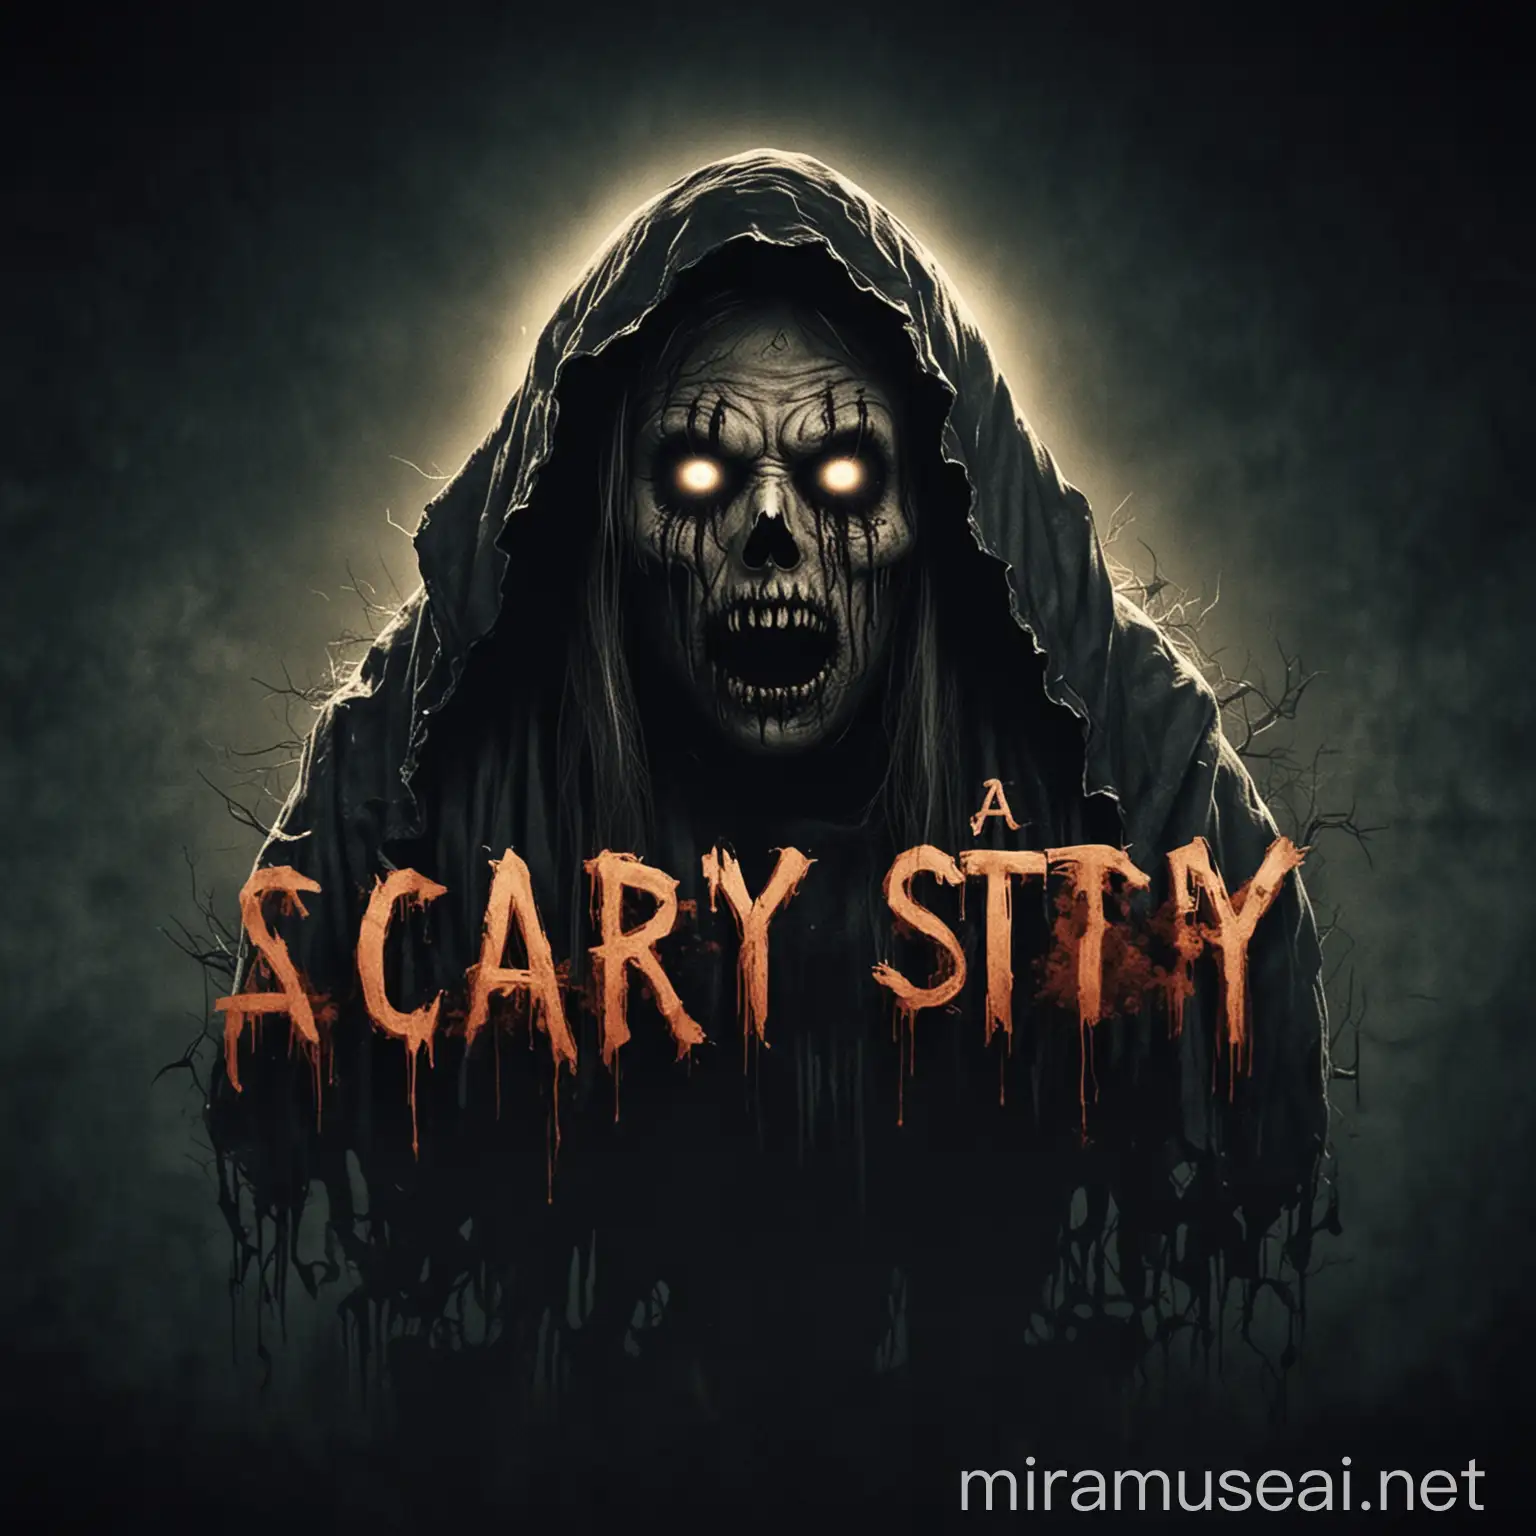 a scary story youtube channel logo